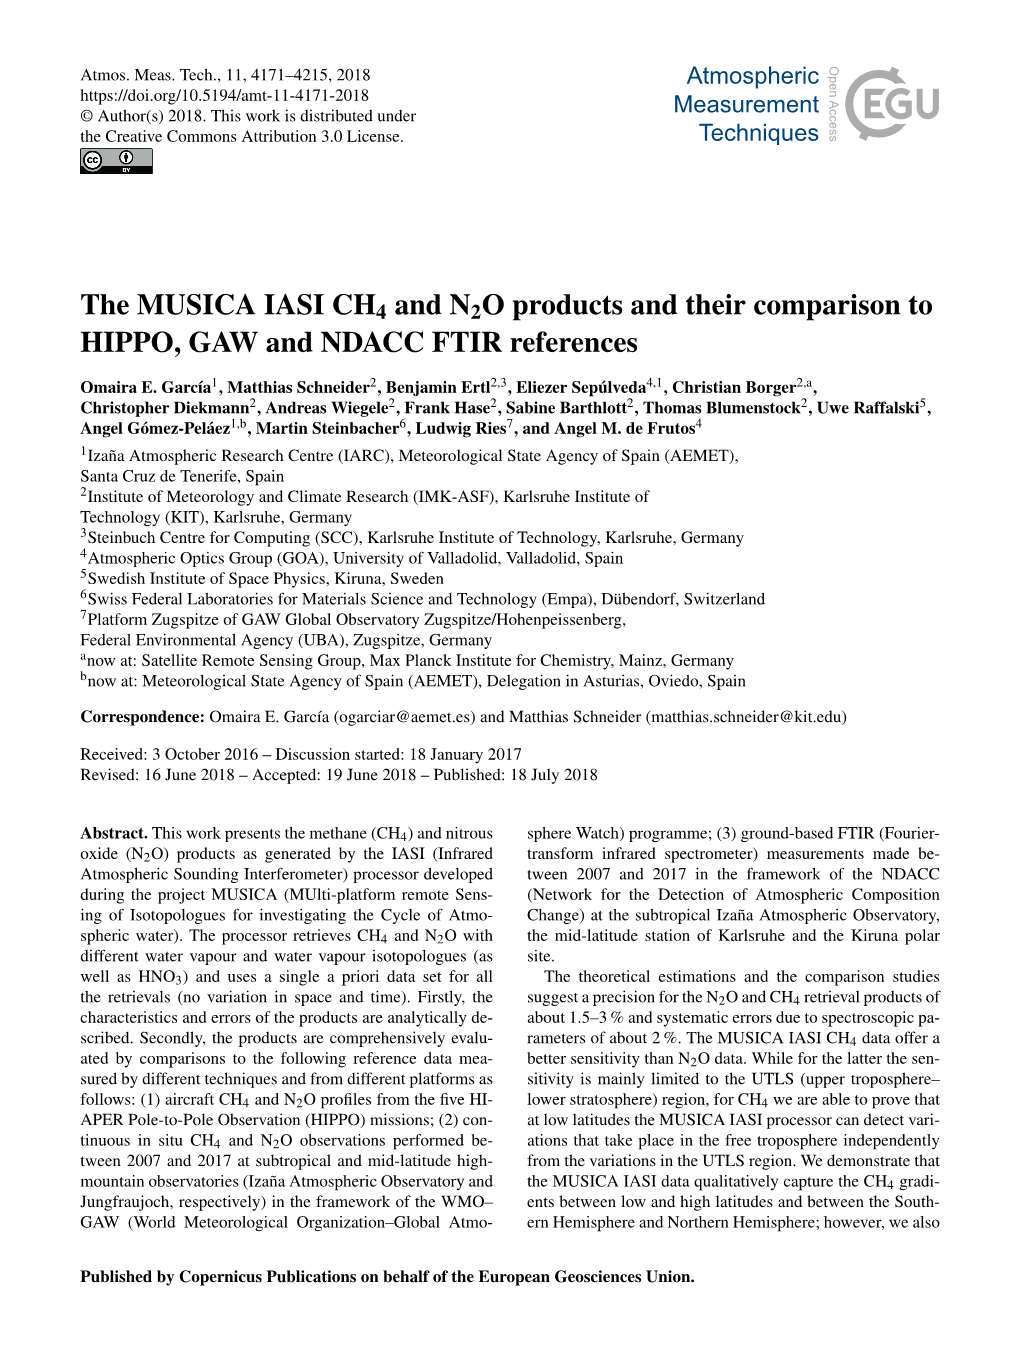 The MUSICA IASI CH4 and N2O Products and Their Comparison to HIPPO, GAW and NDACC FTIR References